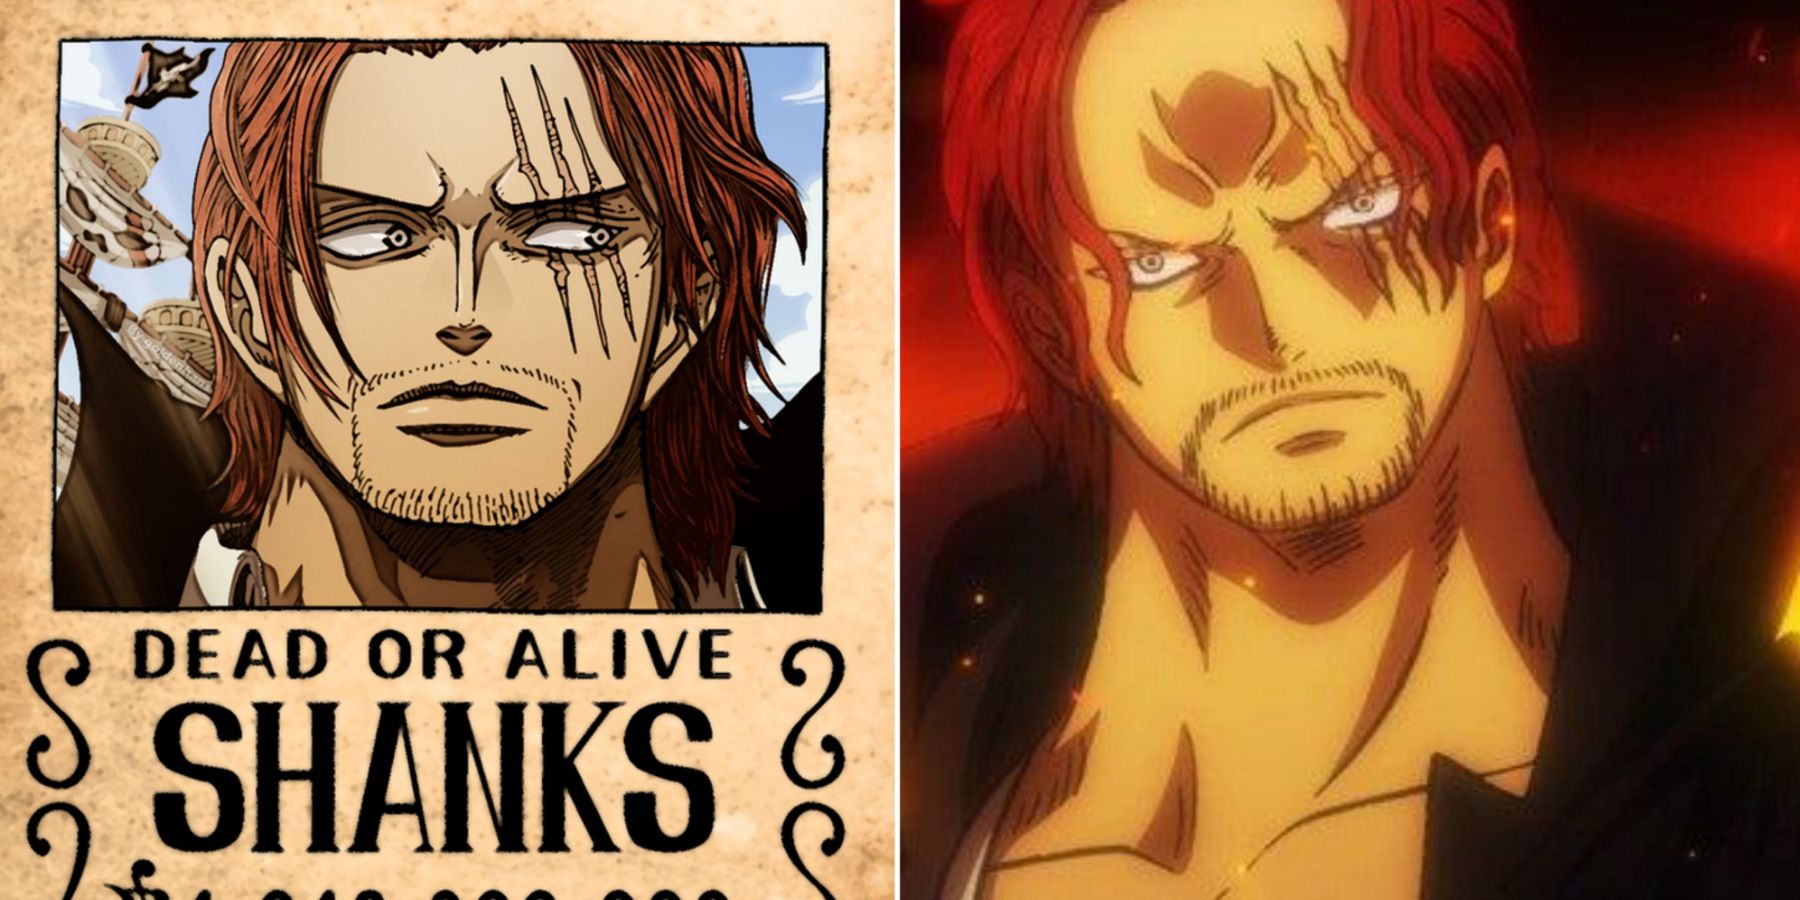 Is Shanks The Strongest Pirate Alive In One Piece?